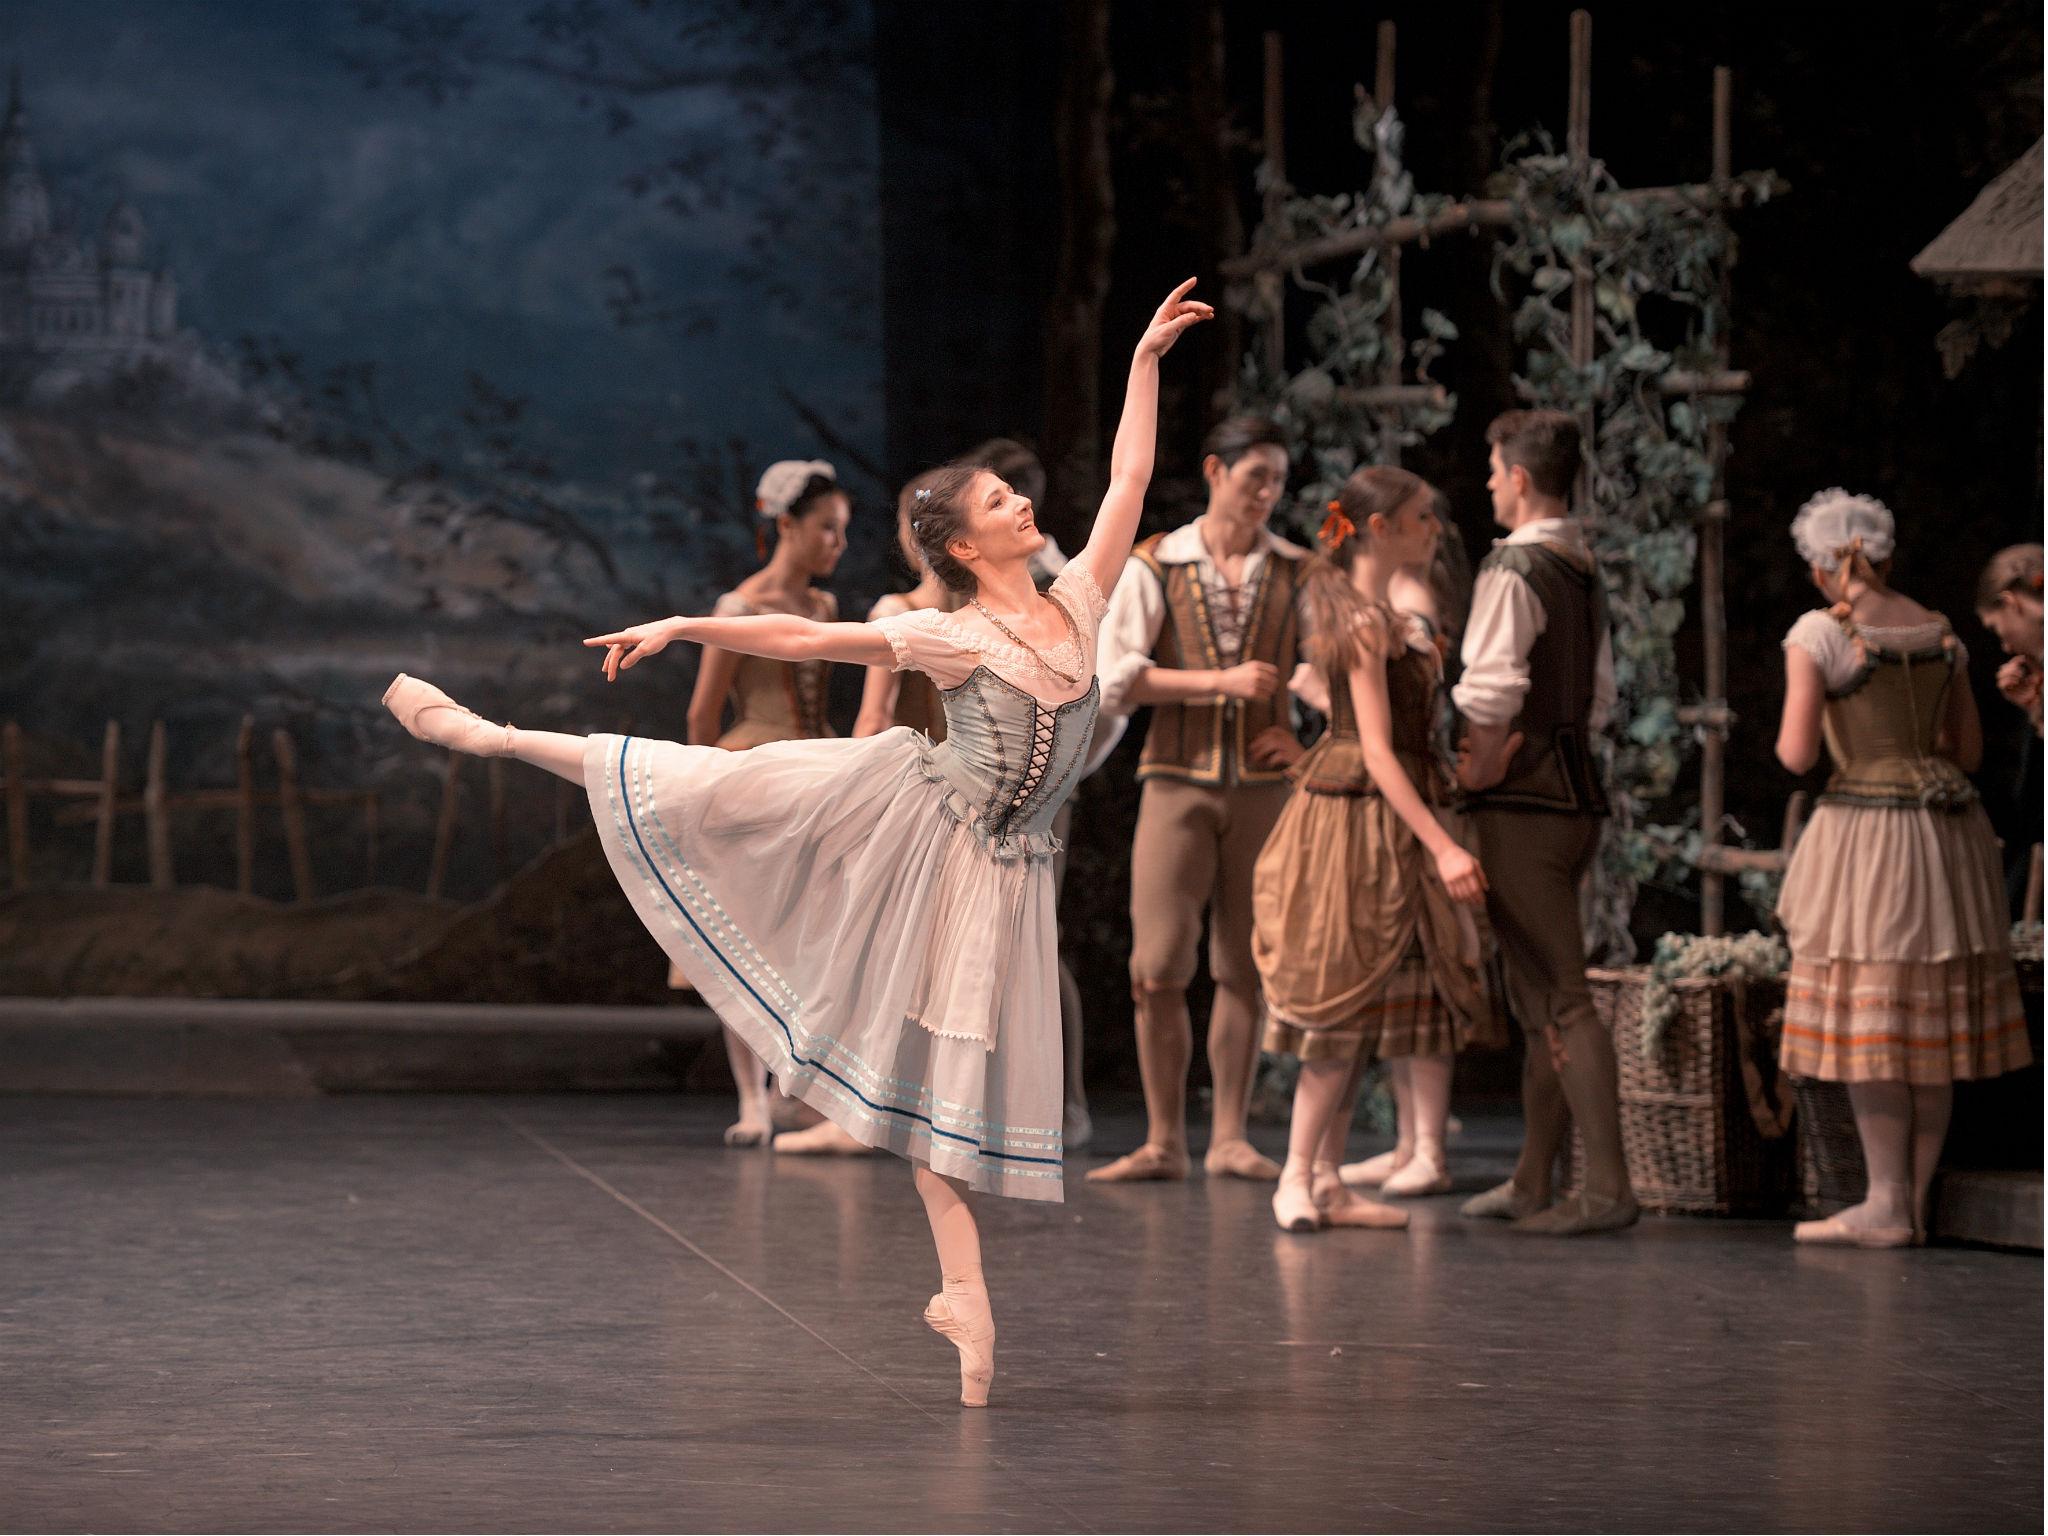 Alina Cojocaru as Giselle in the English National Ballet's revival